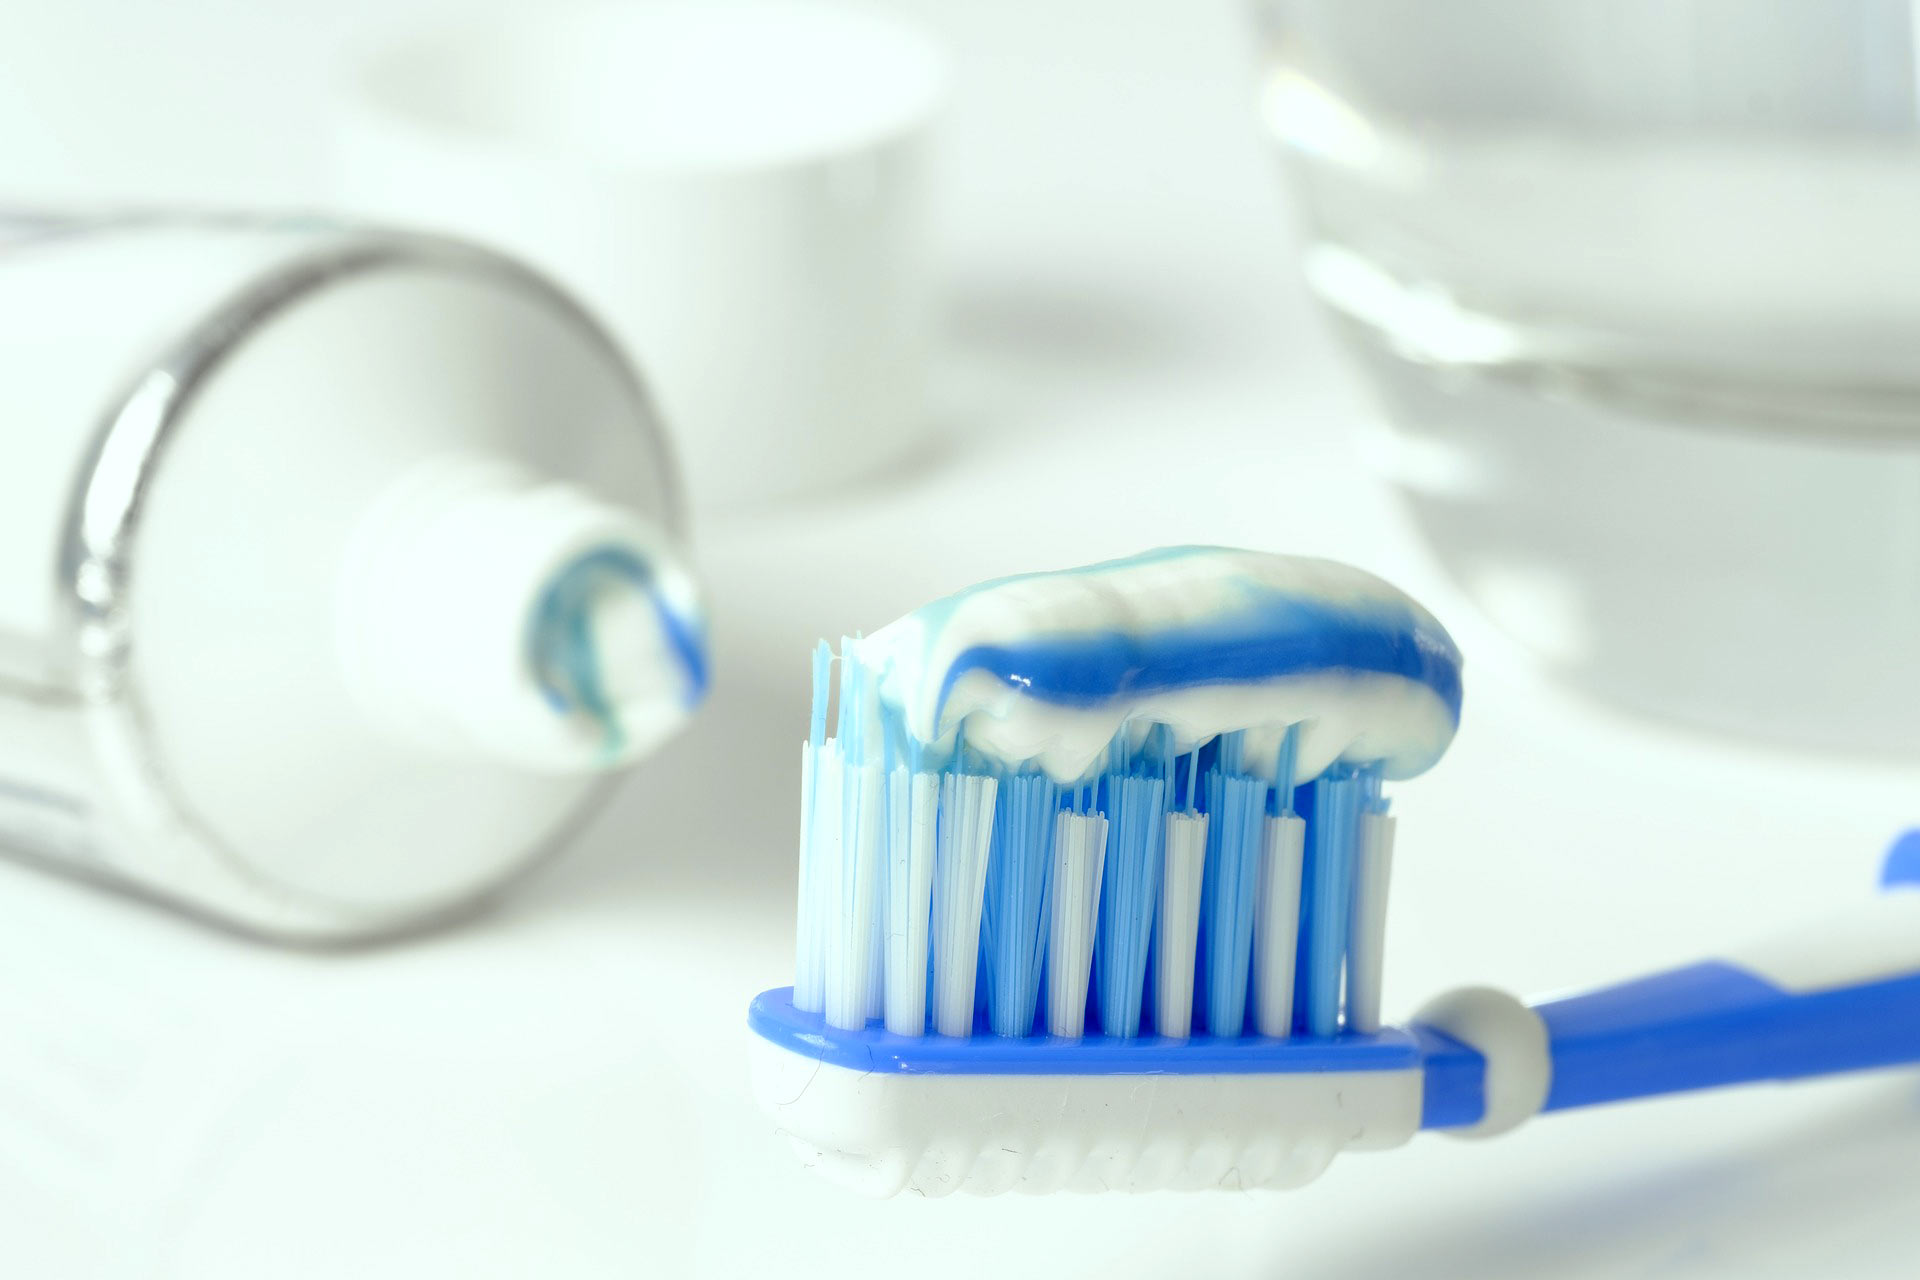 Toothbrushing Frequency and Cardiovascular Disease Risk